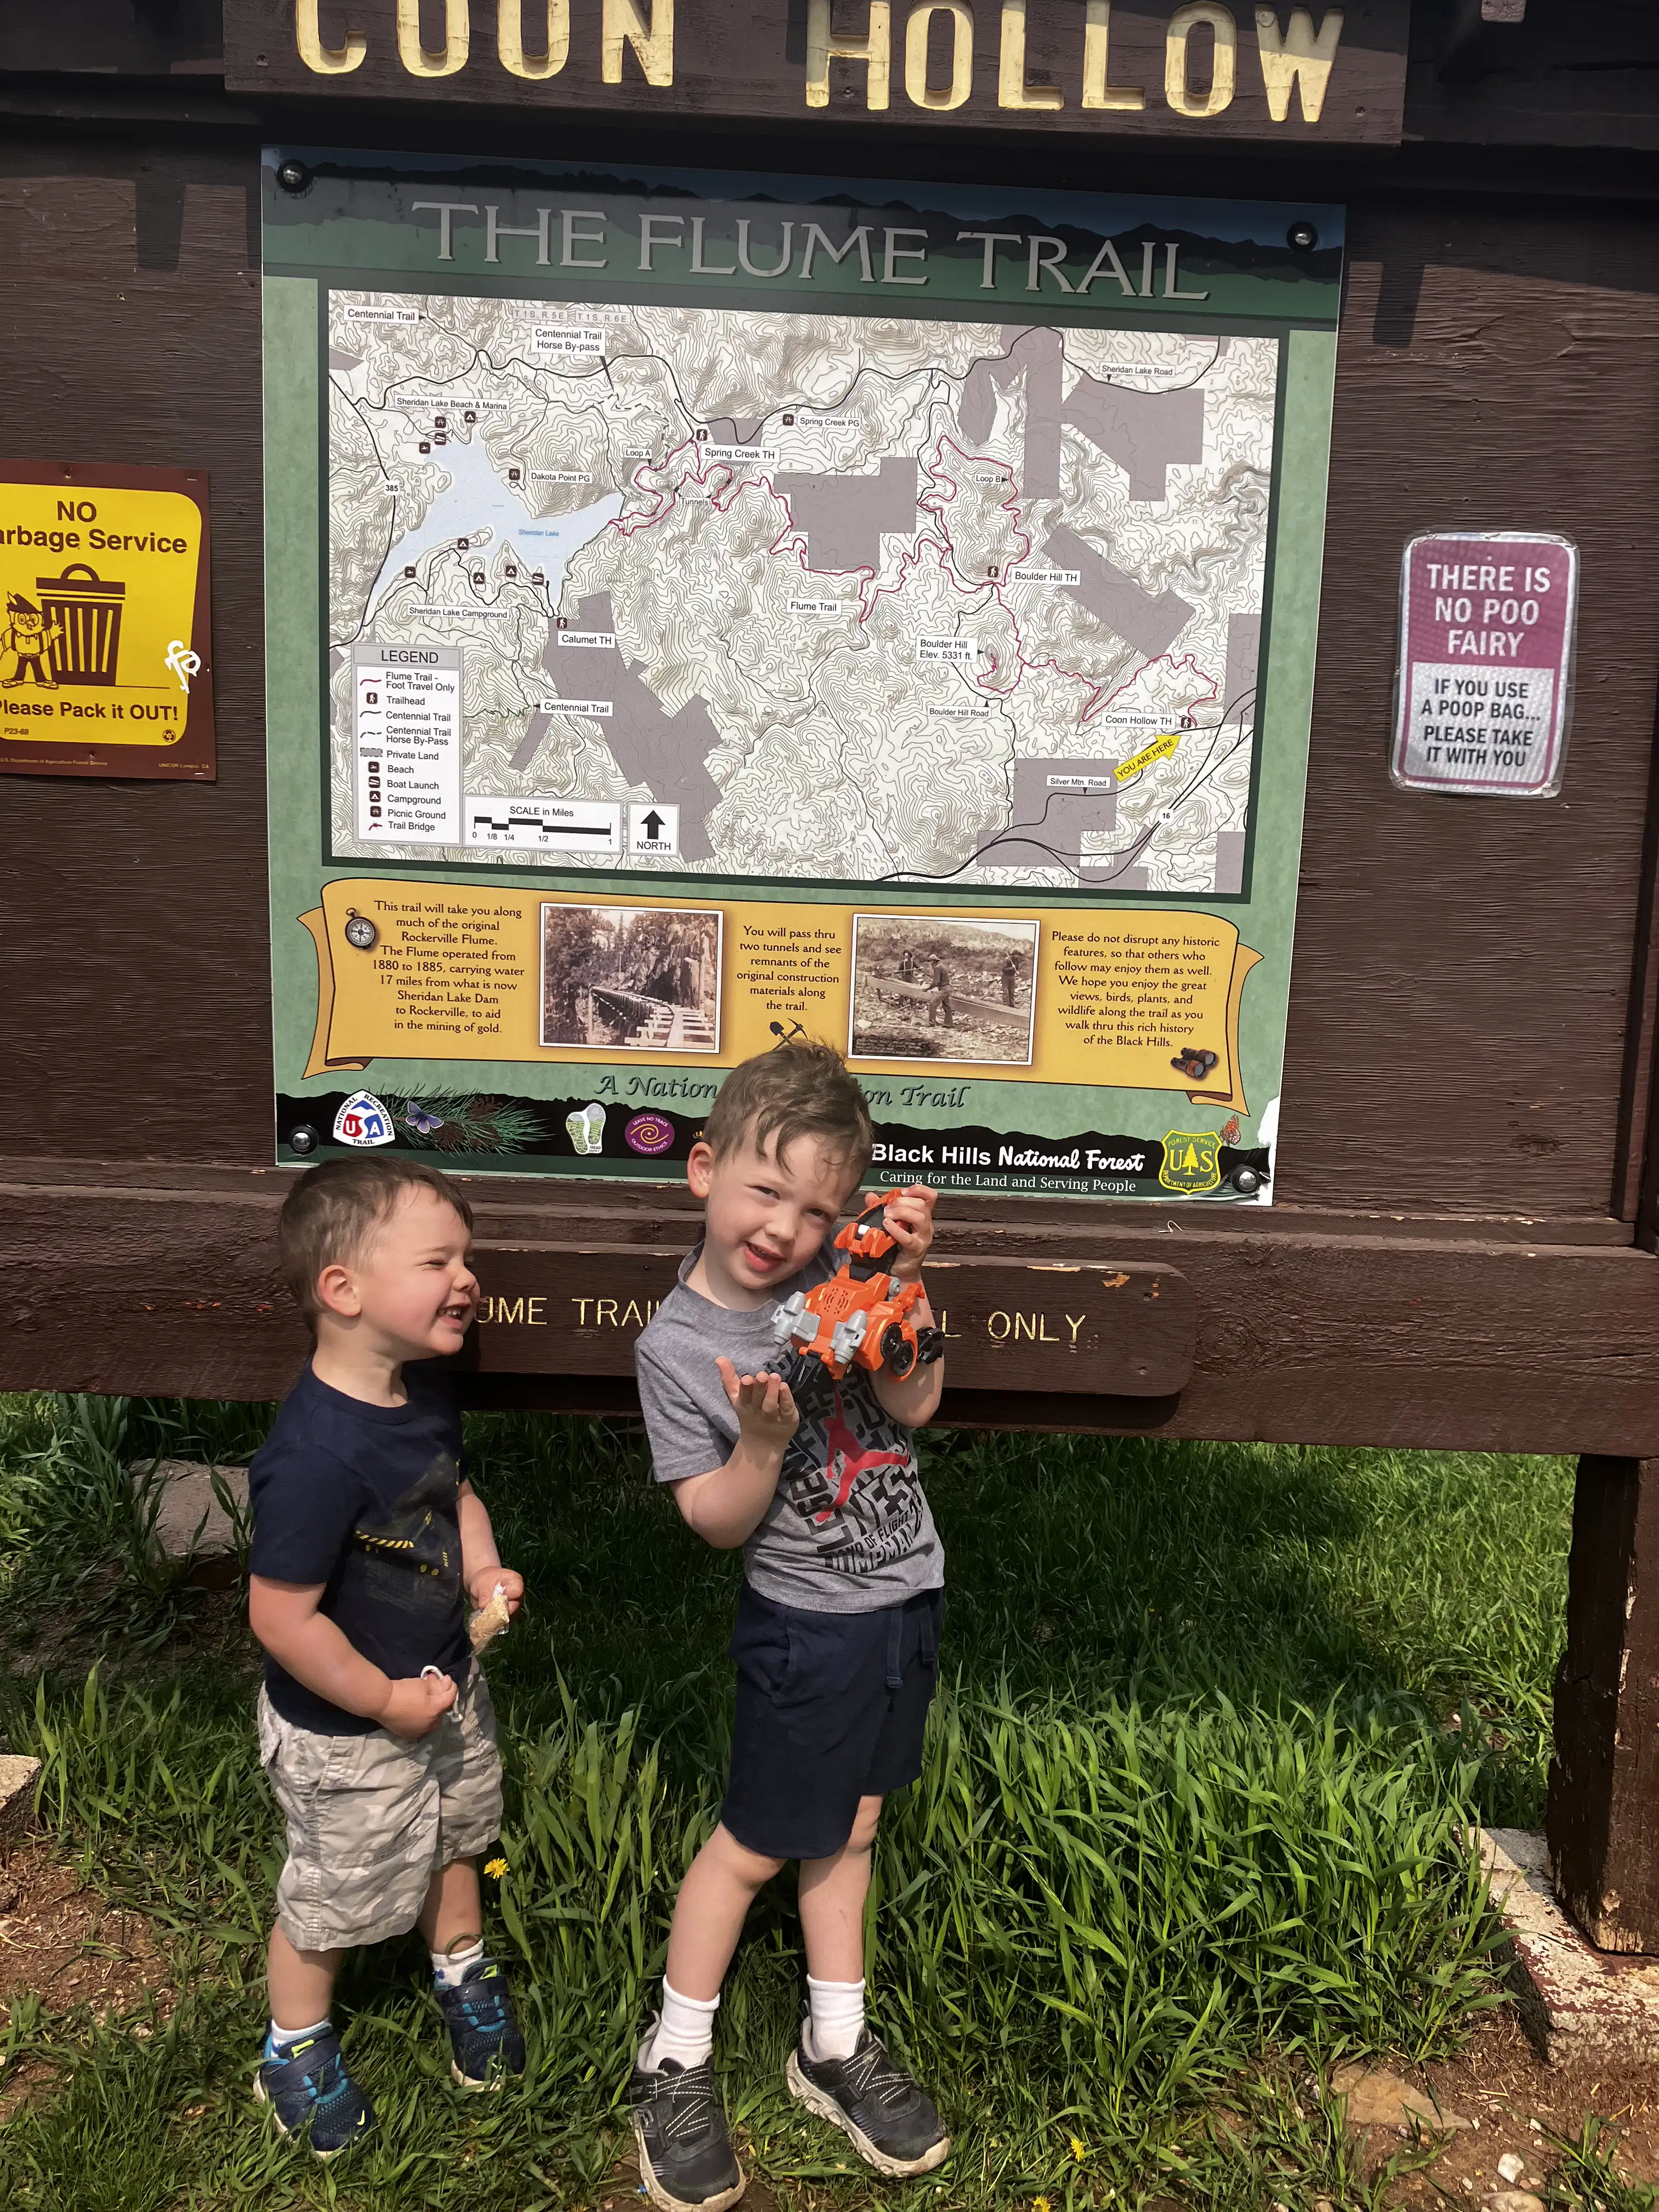 Graham and Royal making funny faces in front of a trail sign for Coon Hollow.